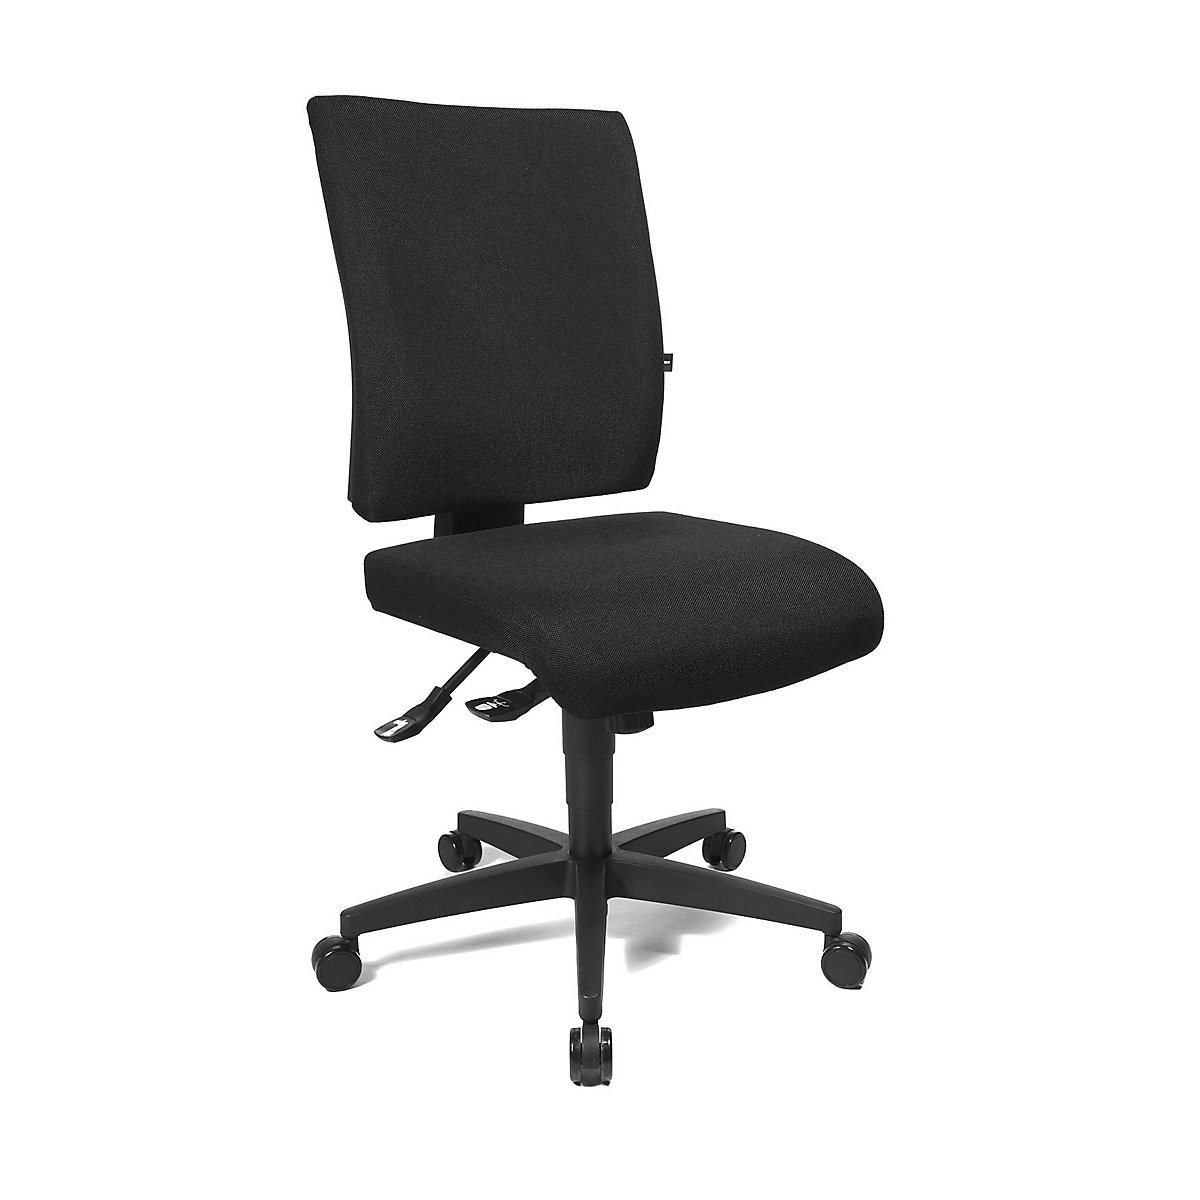 COMFORT office swivel chair – Topstar, height adjustable back rest, black cover-25